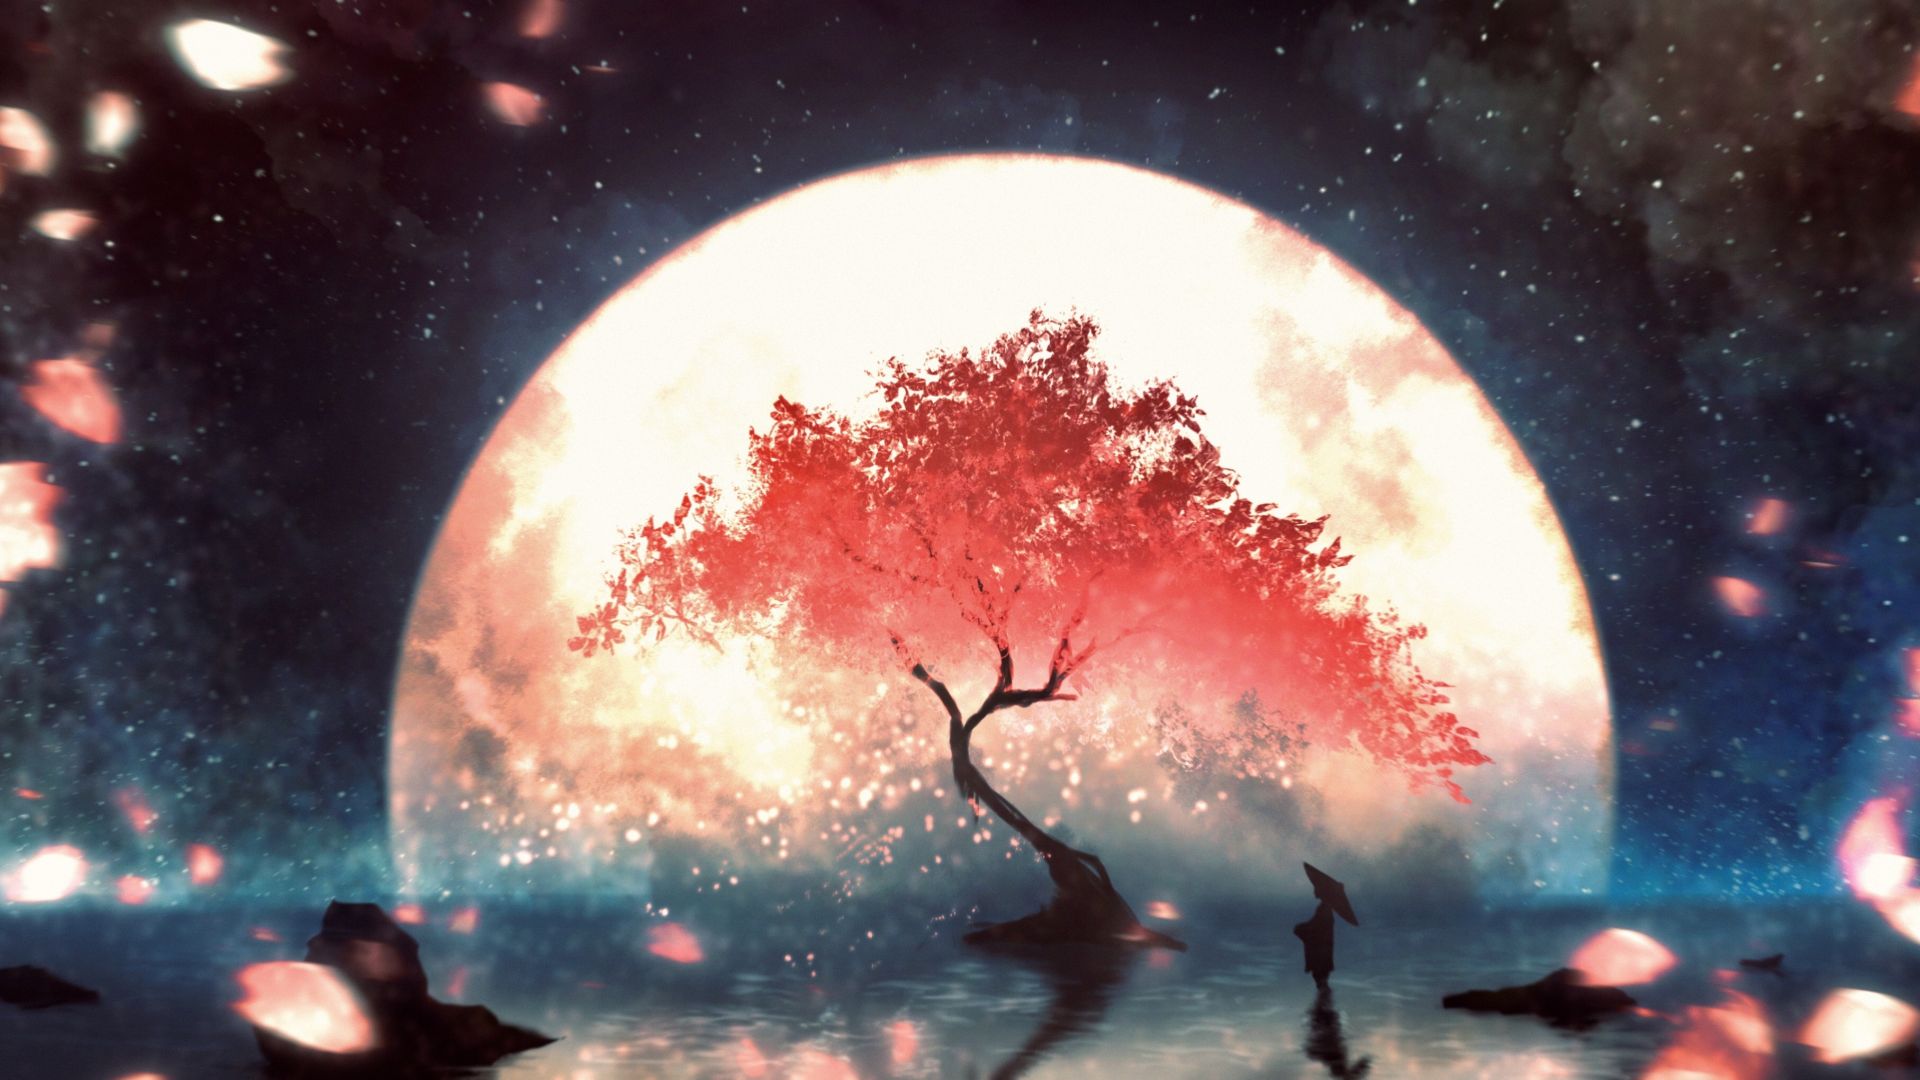 Red tree, moon light, fantasy wallpaper, HD image, picture, background, a32312